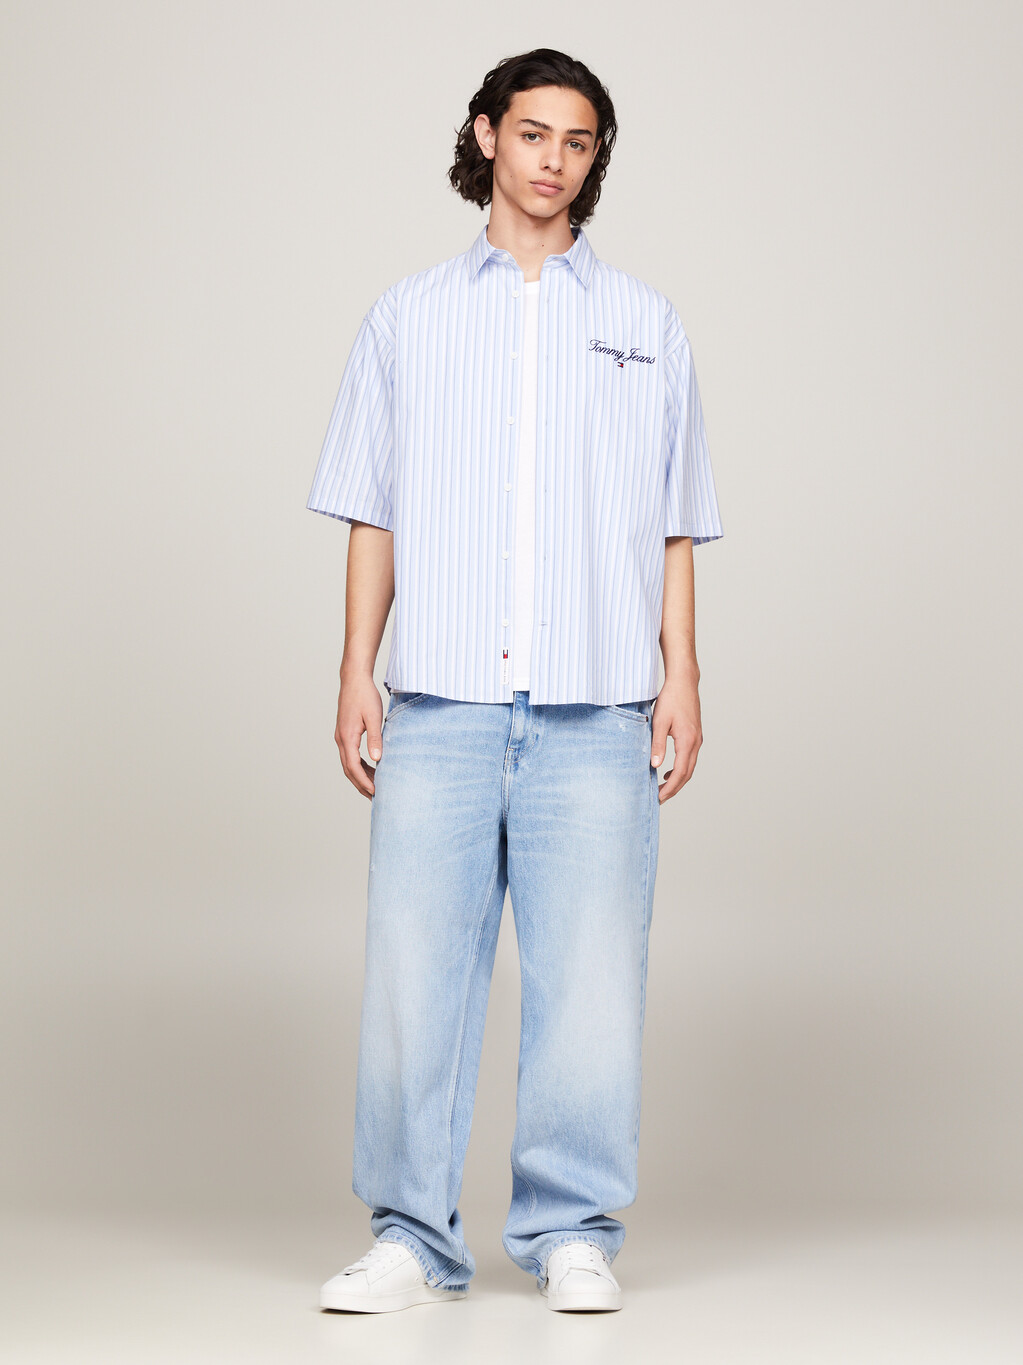 Stripe Relaxed Short Sleeve Shirt, Moderate Blue Stripe, hi-res